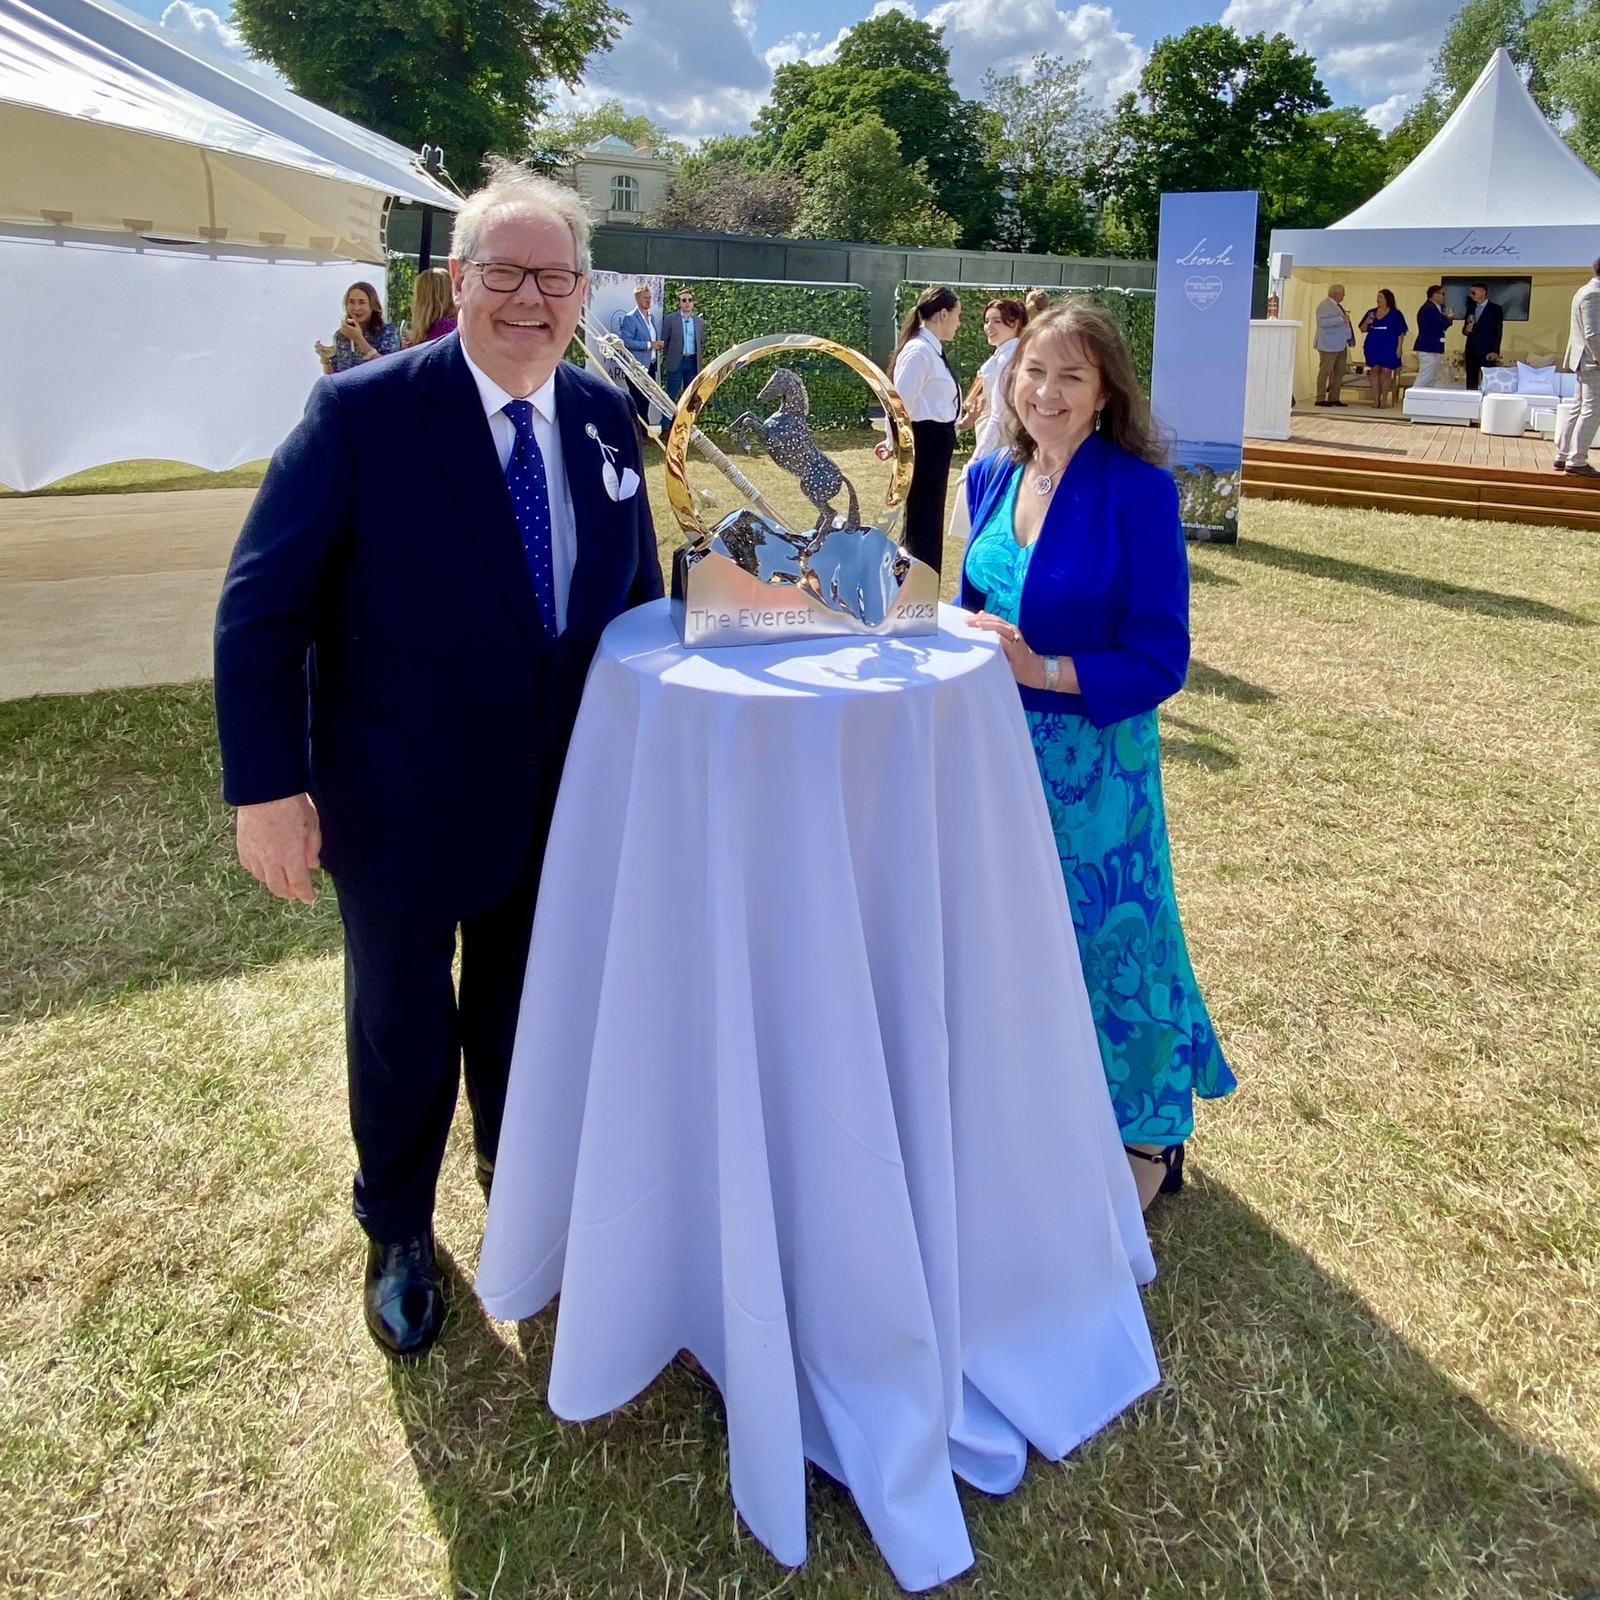 19 June 2023 - Delighted to attend the prestigious Goff’s London Sale held in the beautiful setting of Kensington Palace Gardens.